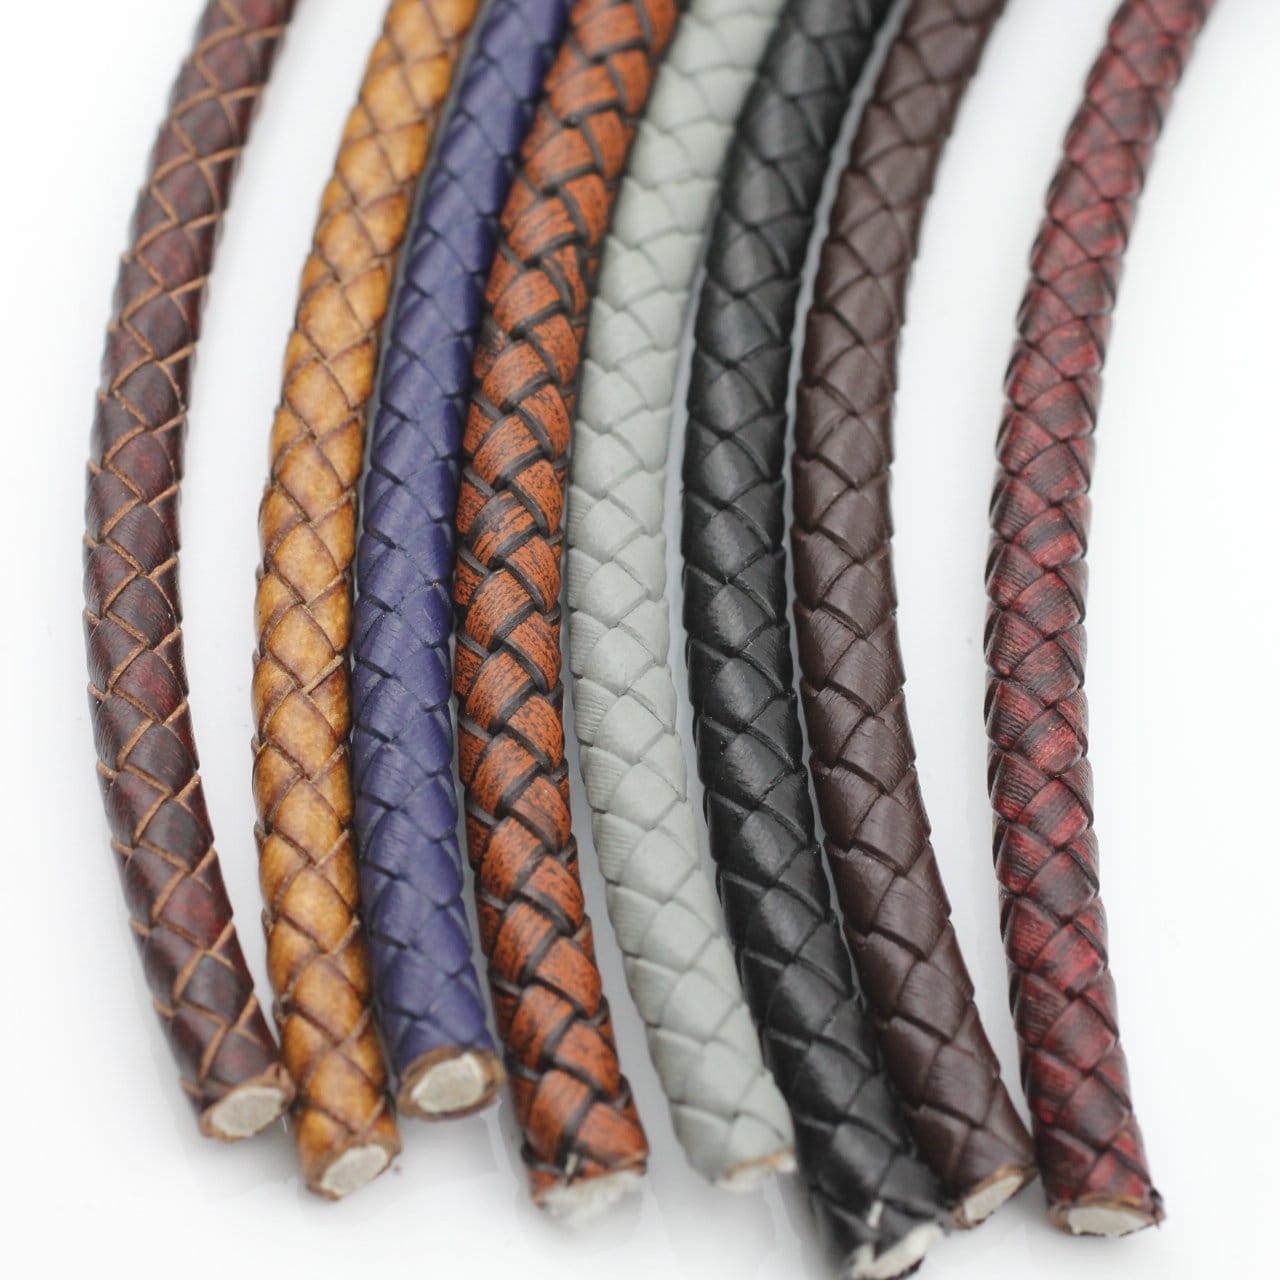 1 M Braided Leather, 6mm Bolo Cord Round Braided Leather, Strap